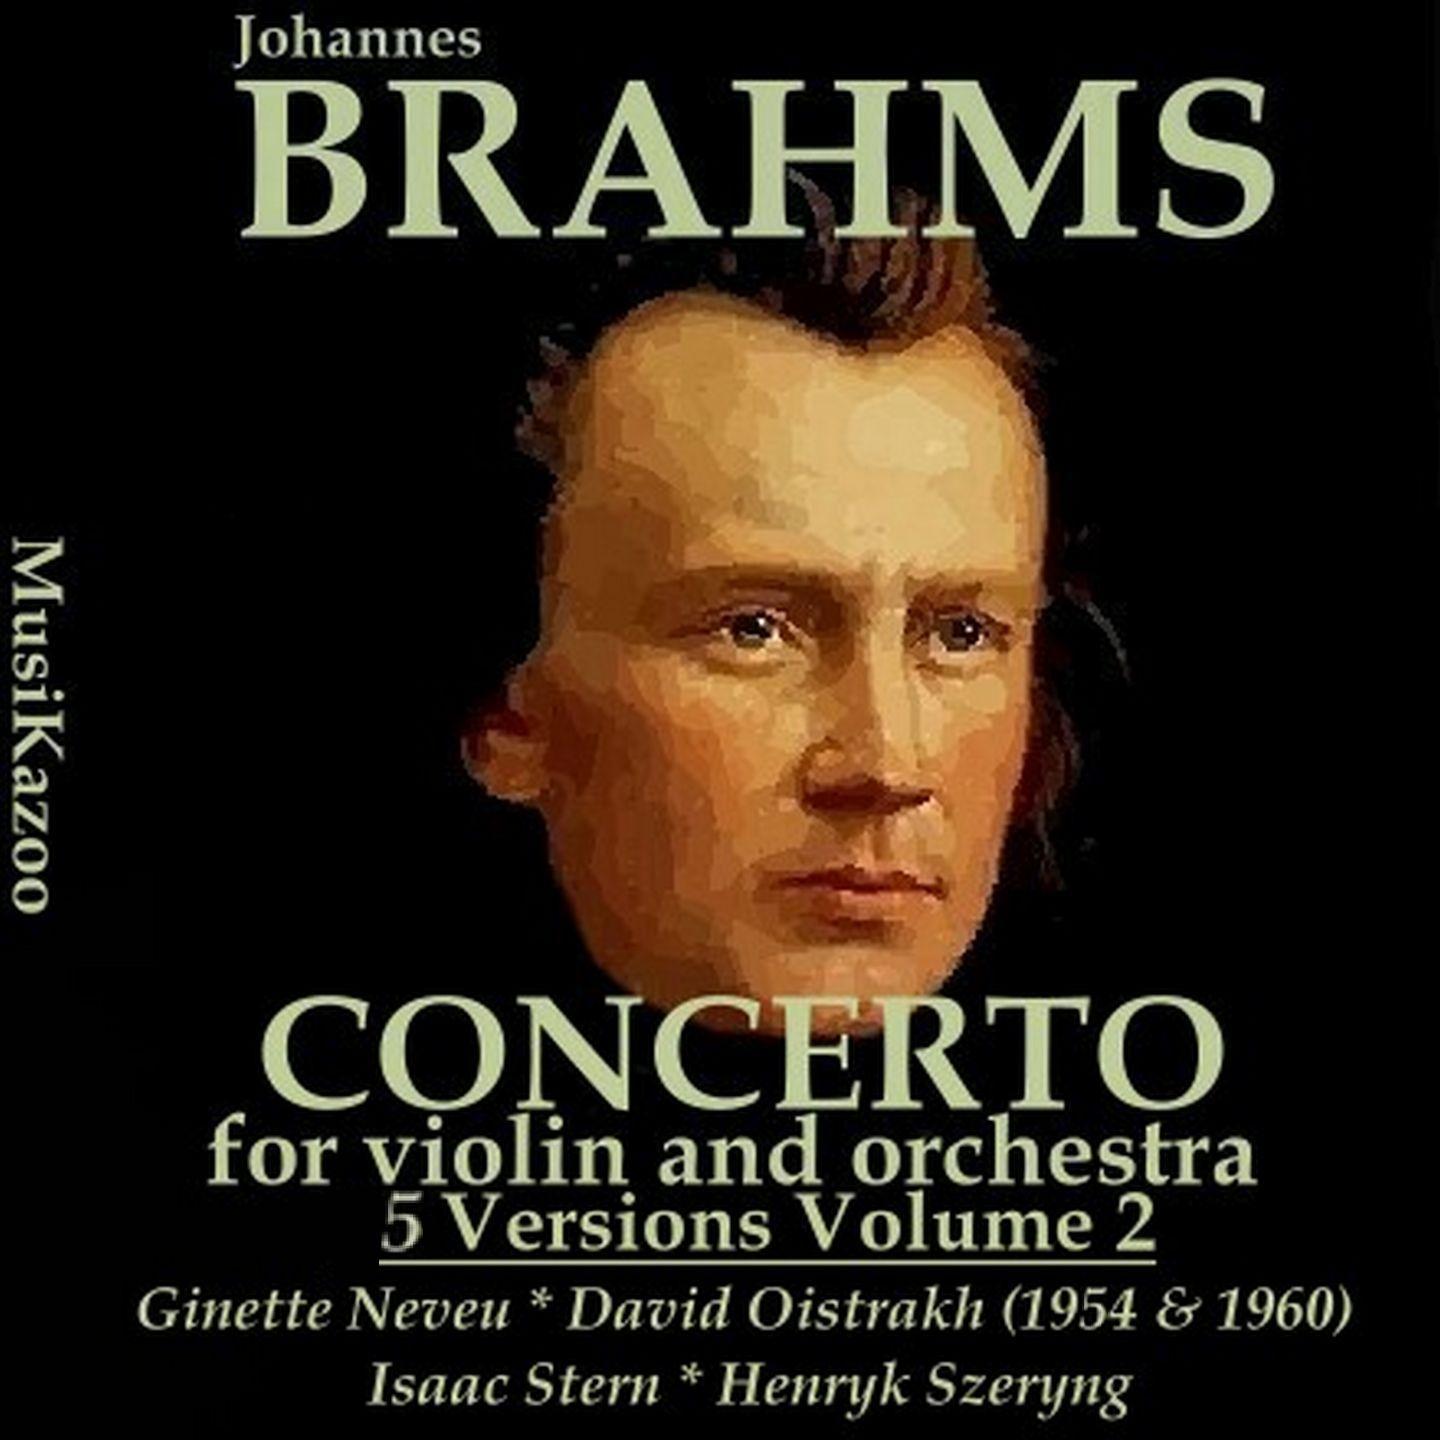 Brahms, Vol. 4 : Concerto for Violin and Orchestra - Five Versions